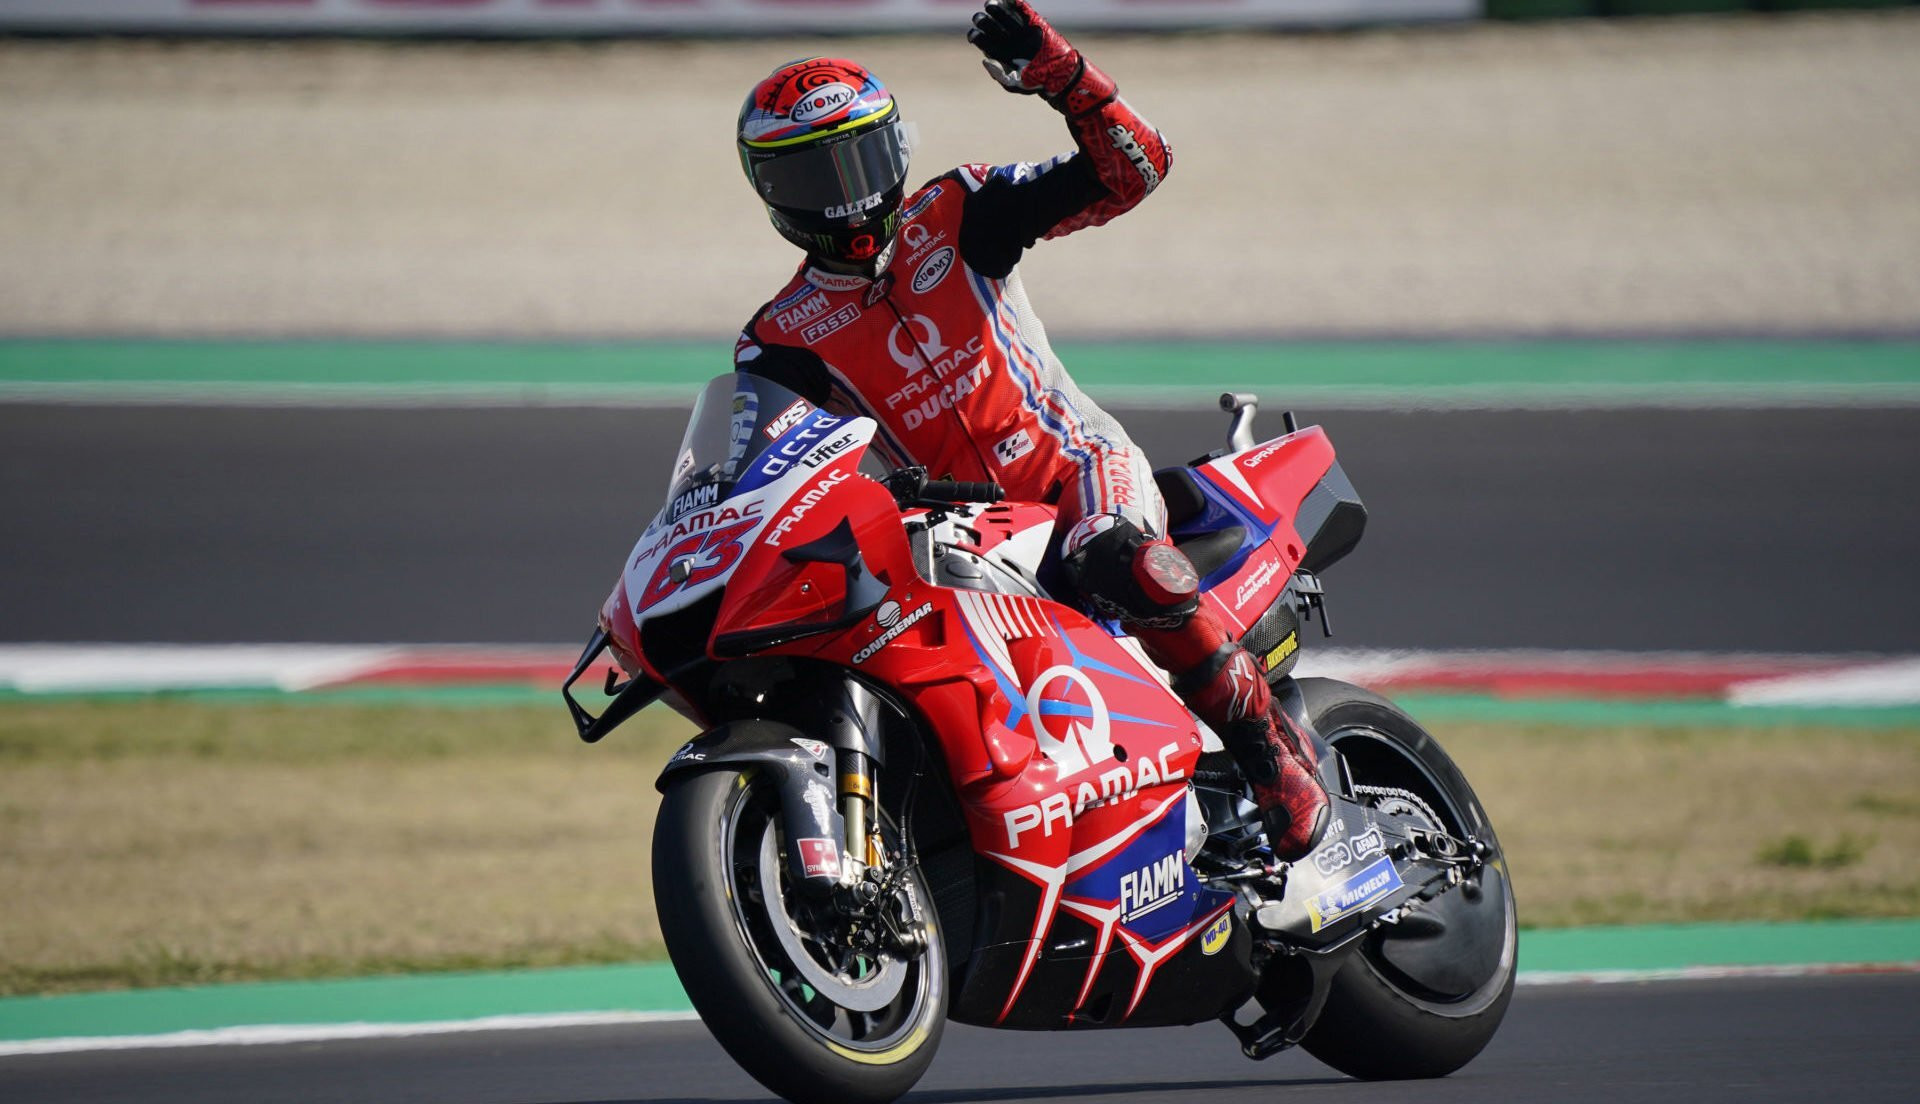 Ducati head to Italy as favourites